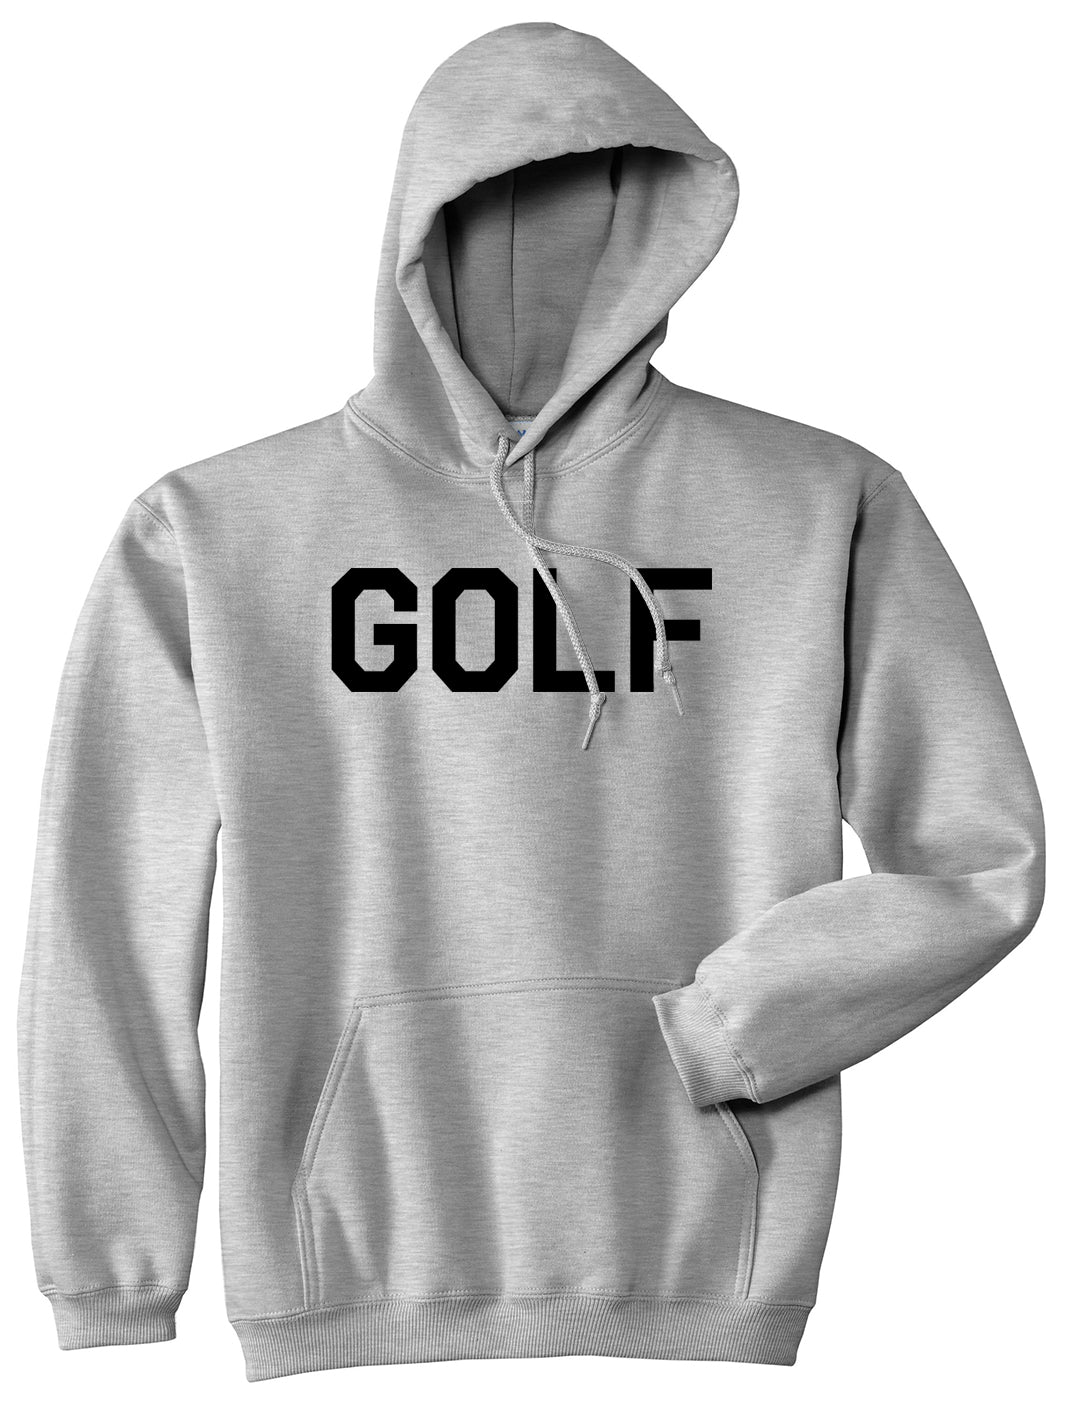 Golf Sport Mens Grey Pullover Hoodie by KINGS OF NY